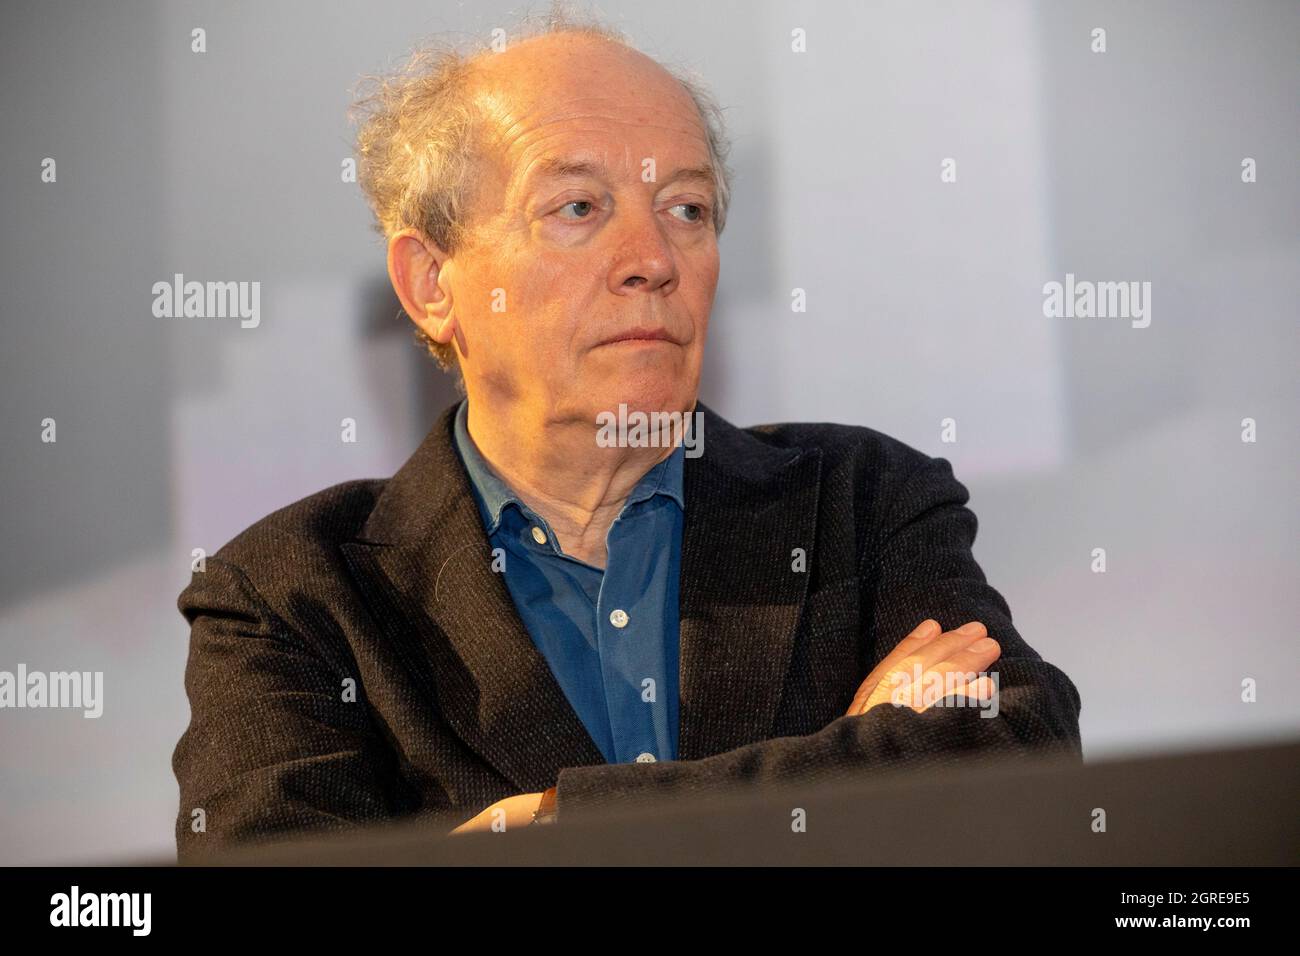 Director Luc Dardenne pictured at the presentation of an exhibition dedicated to late French actor Louis de Funes, at the Cinema Palace in Brussels, F Stock Photo